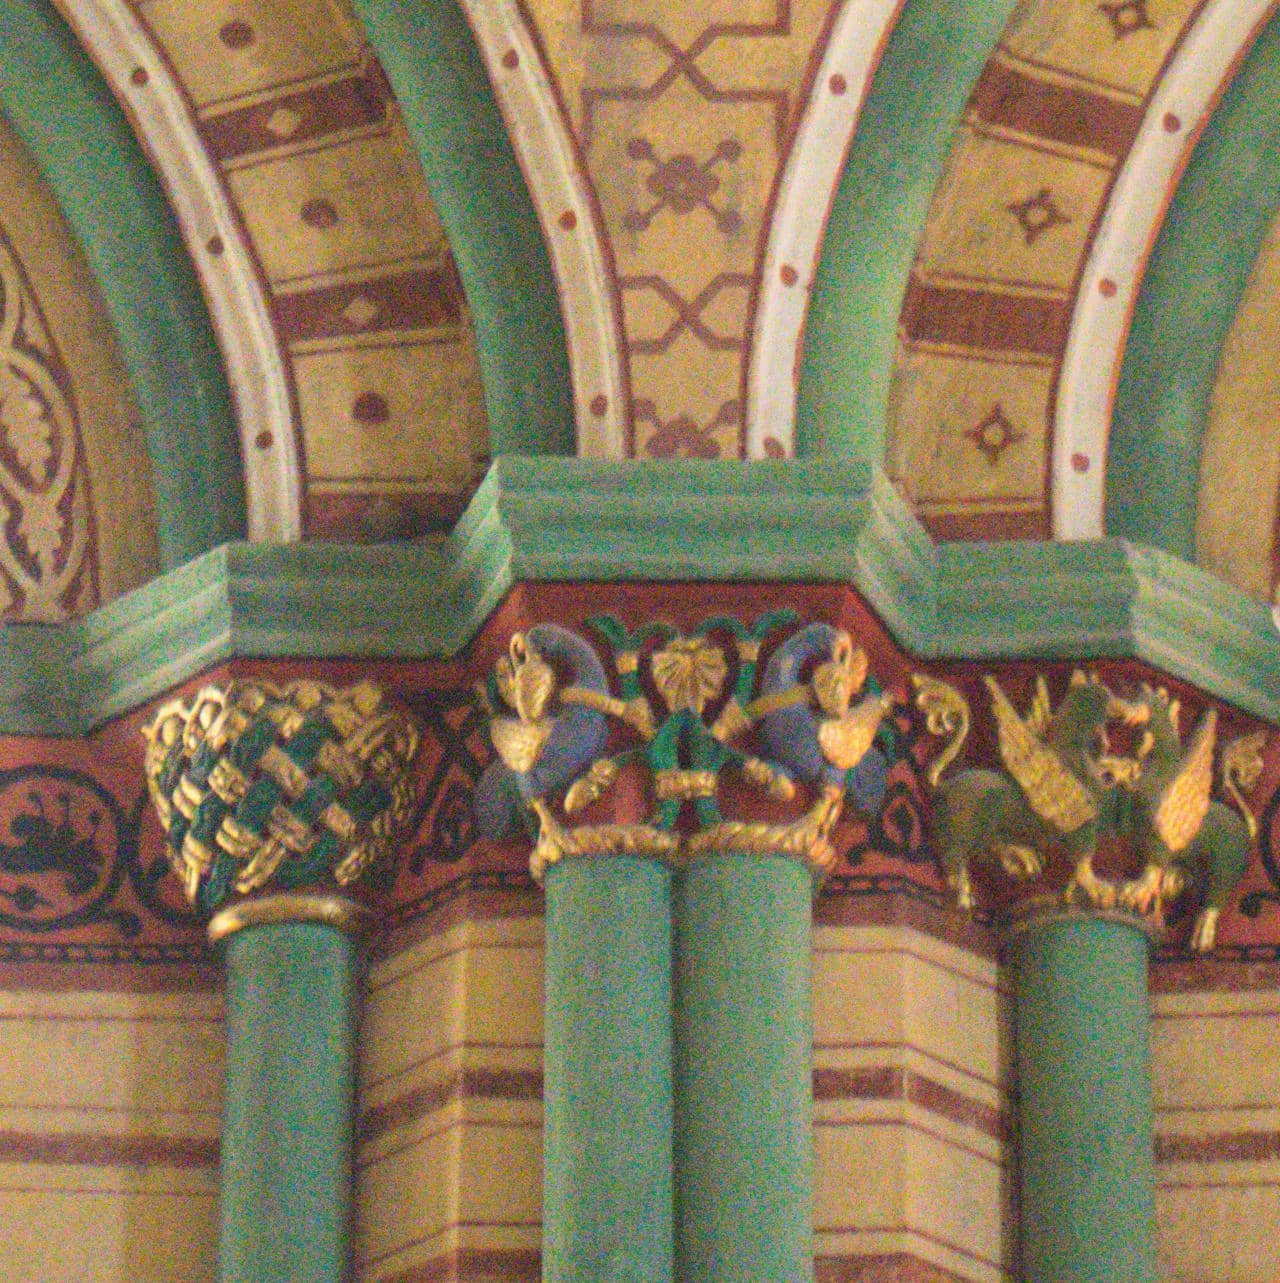 The interior is fully painted and features very detailed carved capitals